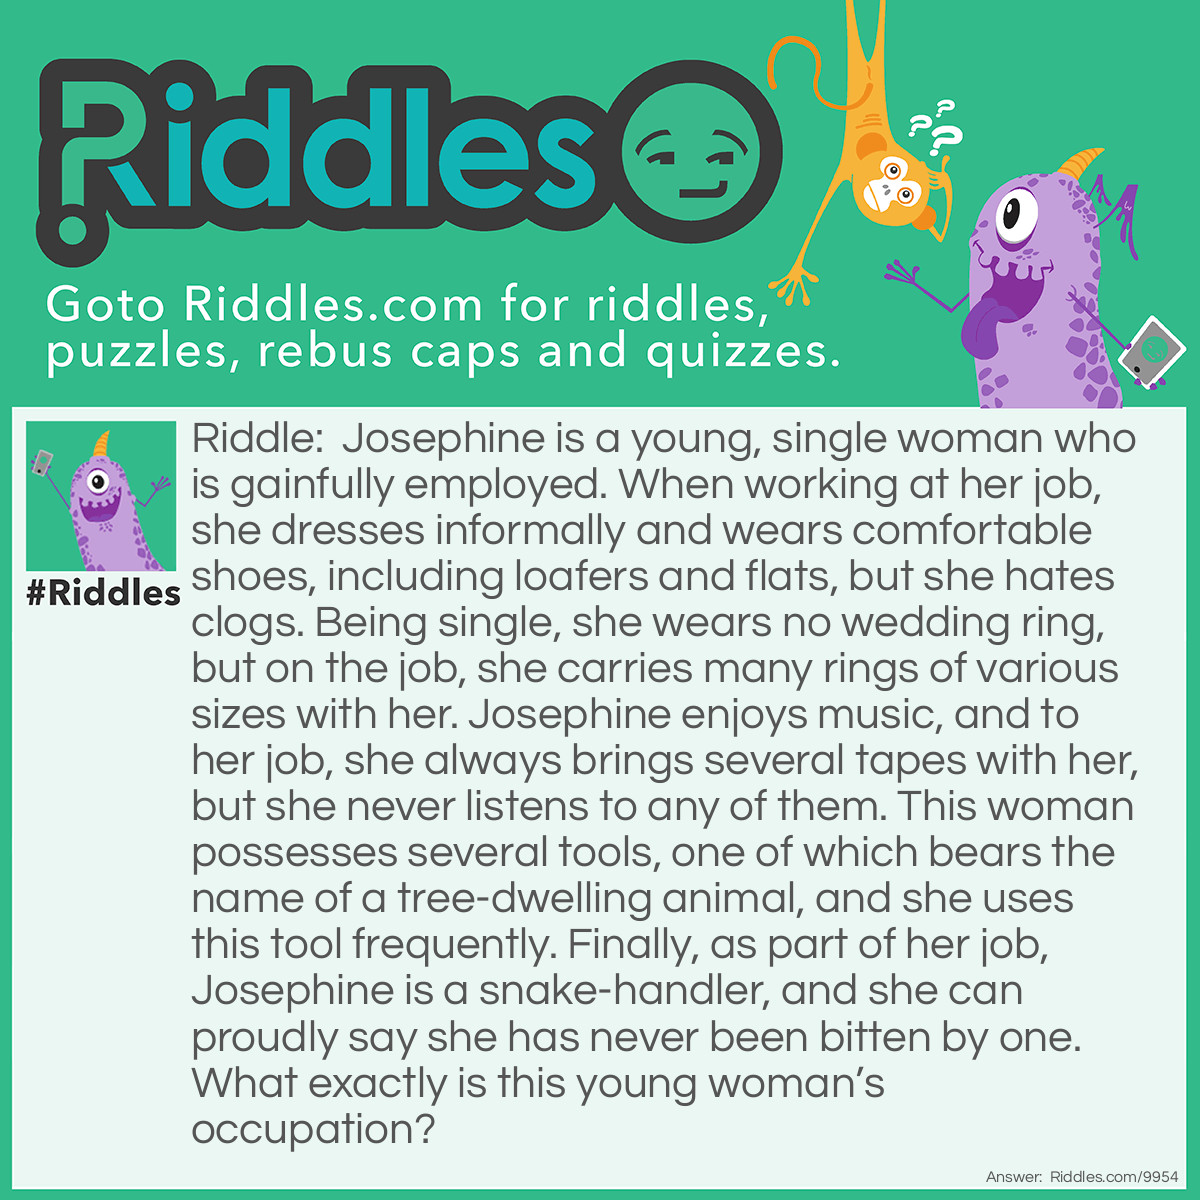 Riddle: Josephine is a young, single woman who is gainfully employed. When working at her job, she dresses informally and wears comfortable shoes, including loafers and flats, but she hates clogs. Being single, she wears no wedding ring, but on the job, she carries many rings of various sizes with her. Josephine enjoys music, and to her job, she always brings several tapes with her, but she never listens to any of them. This woman possesses several tools, one of which bears the name of a tree-dwelling animal, and she uses this tool frequently. Finally, as part of her job, Josephine is a snake-handler, and she can proudly say she has never been bitten by one. What exactly is this young woman's occupation? Answer: Josephine is a Plumber. She hates Clogs. She carries rubber O-rings to fix faucets. She uses plumbers Tape and a Tape measure. She uses a Monkey wrench. She also uses a Drain Snake to clear clogged pipes.